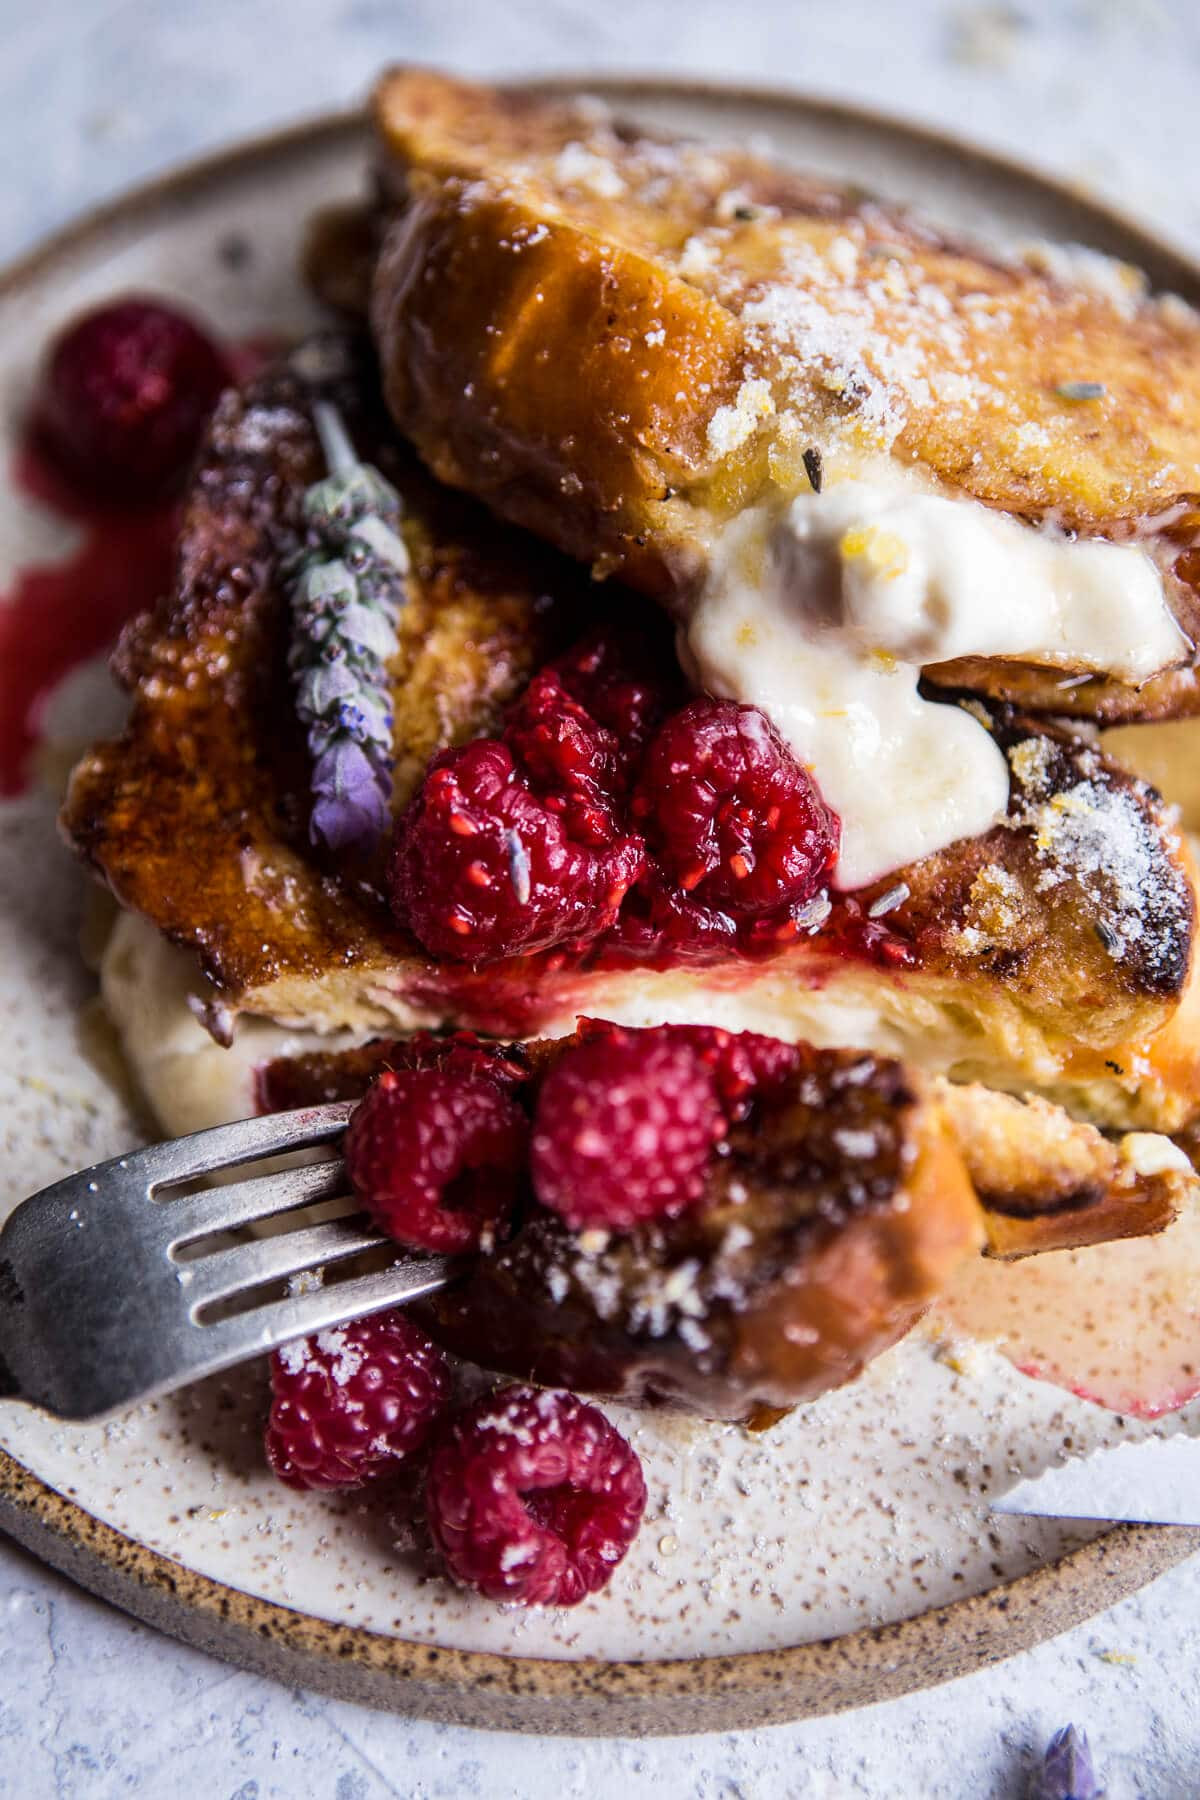 Cream Cheese Stuffed French Toast
 Whipped Cream Cheese Stuffed French Toast with Raspberries